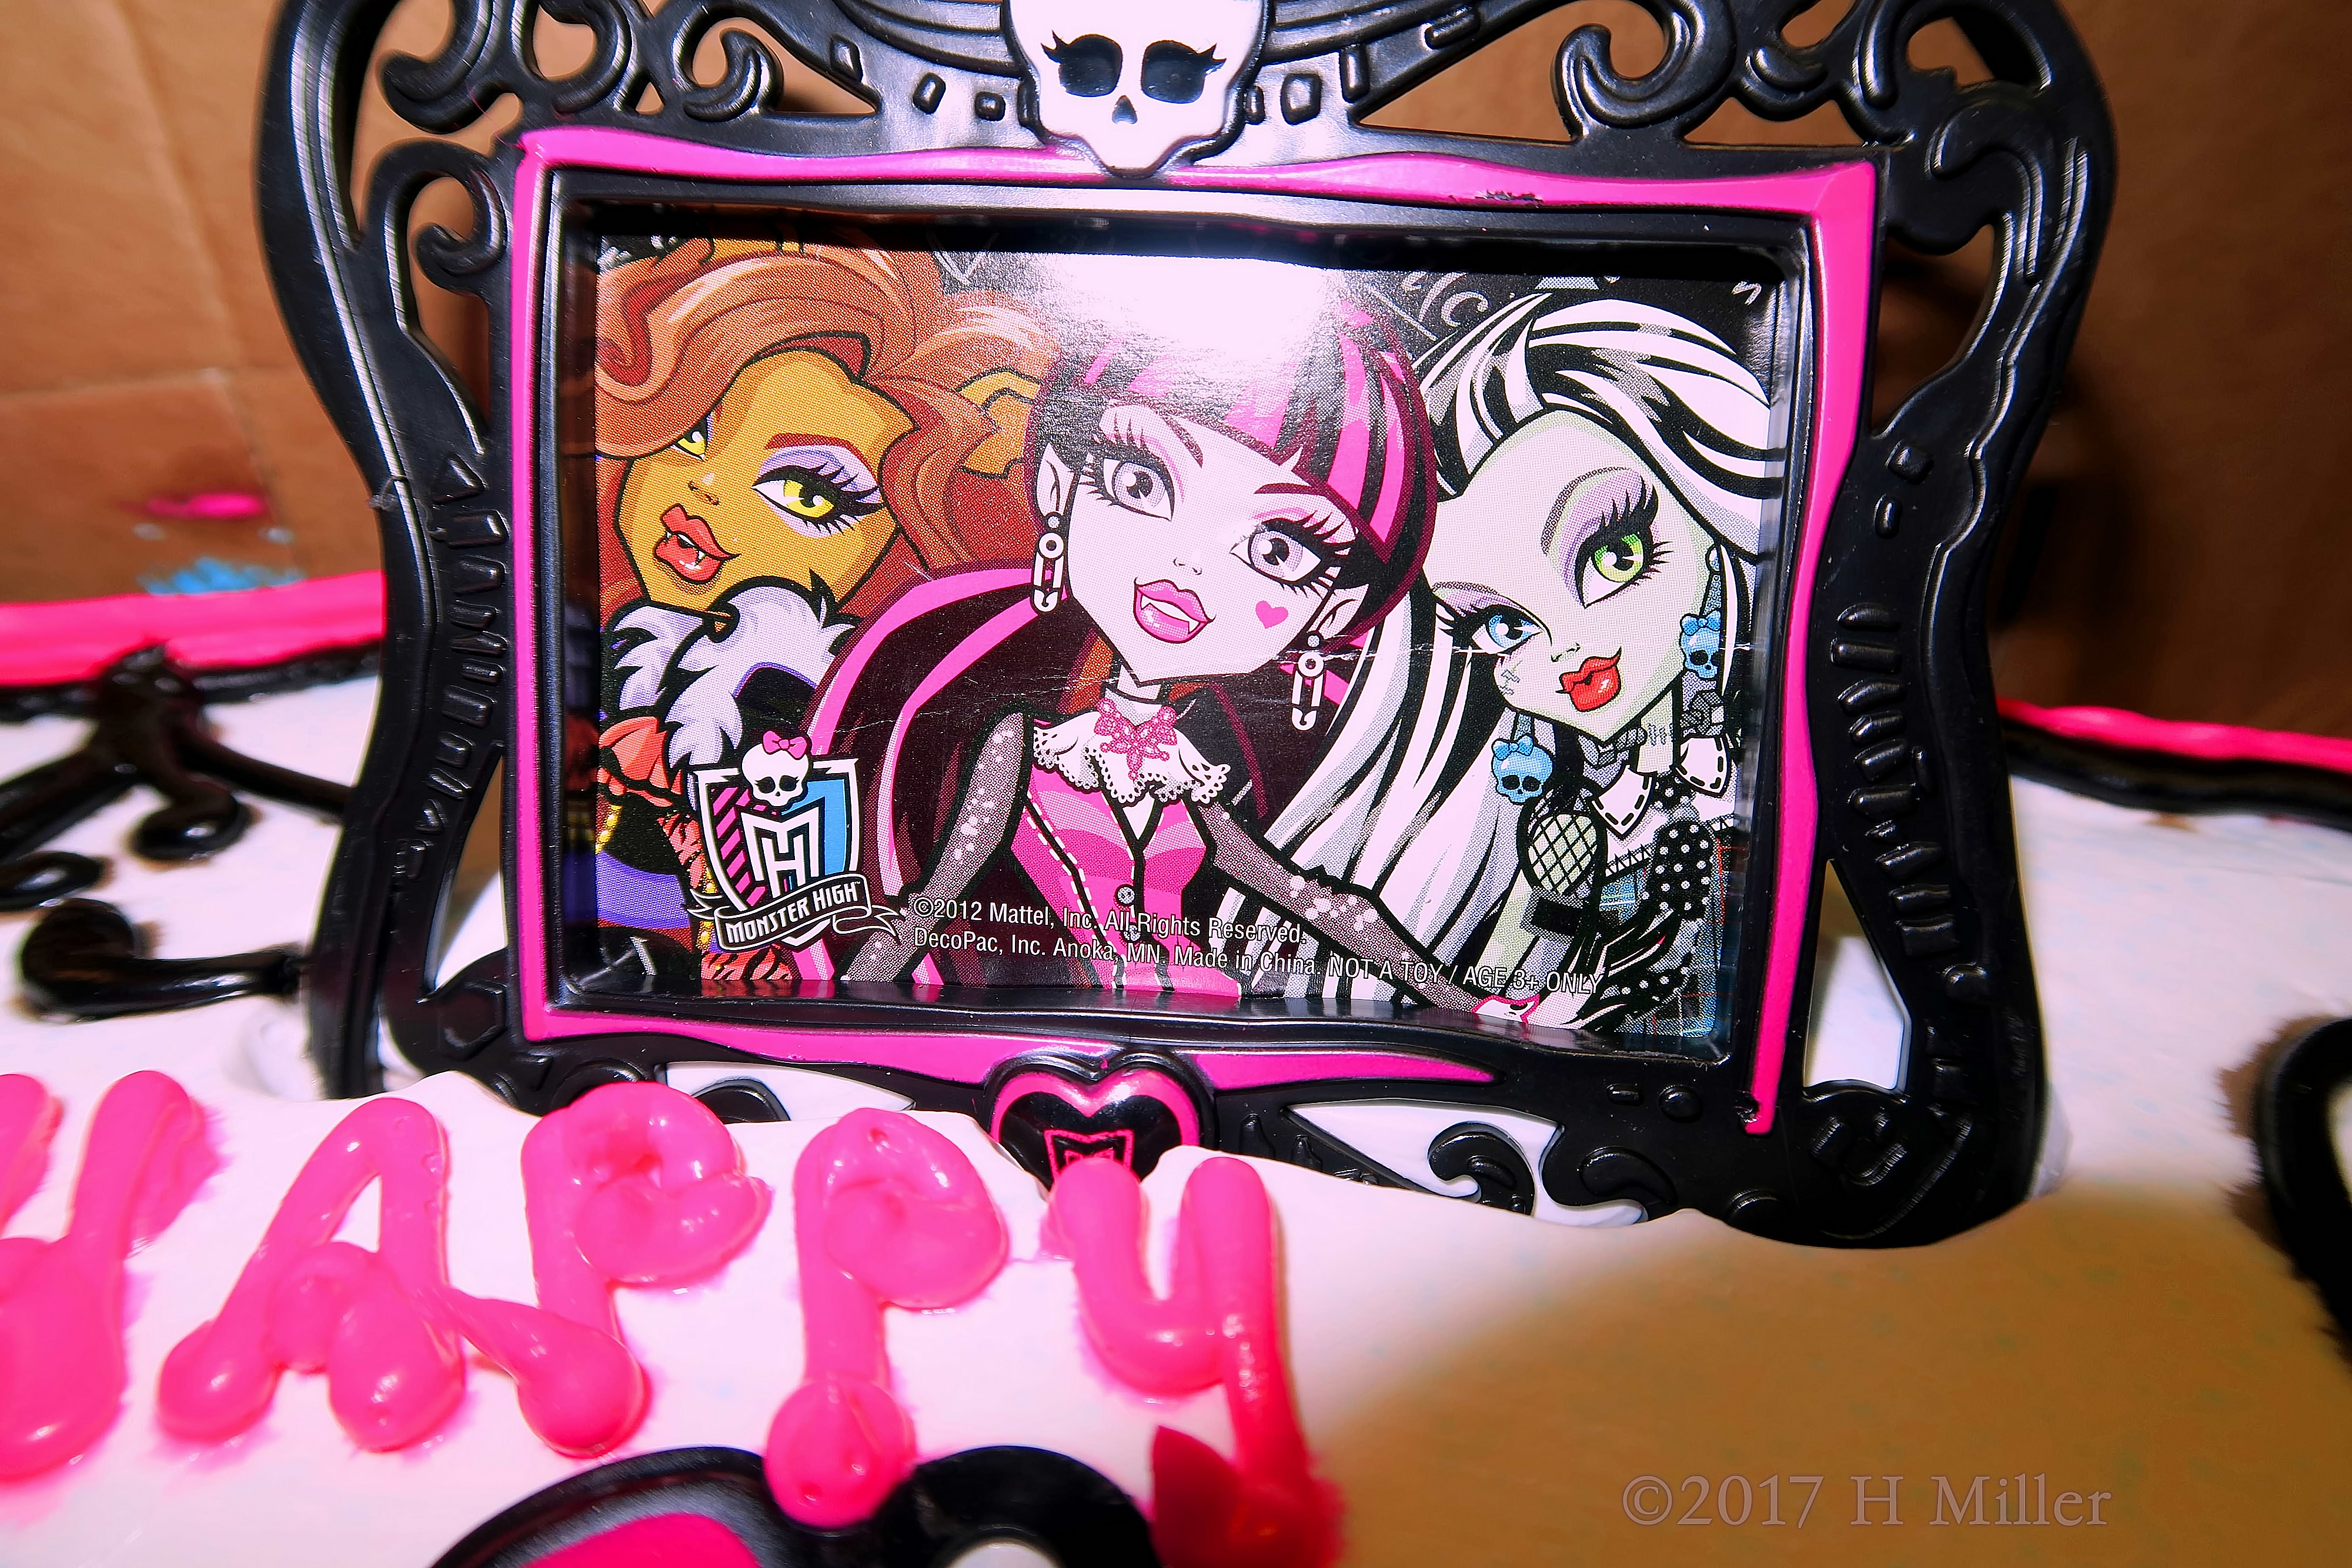 A Close Up Of The Monster High Group On Top Of The Birthday Cupcakes! 